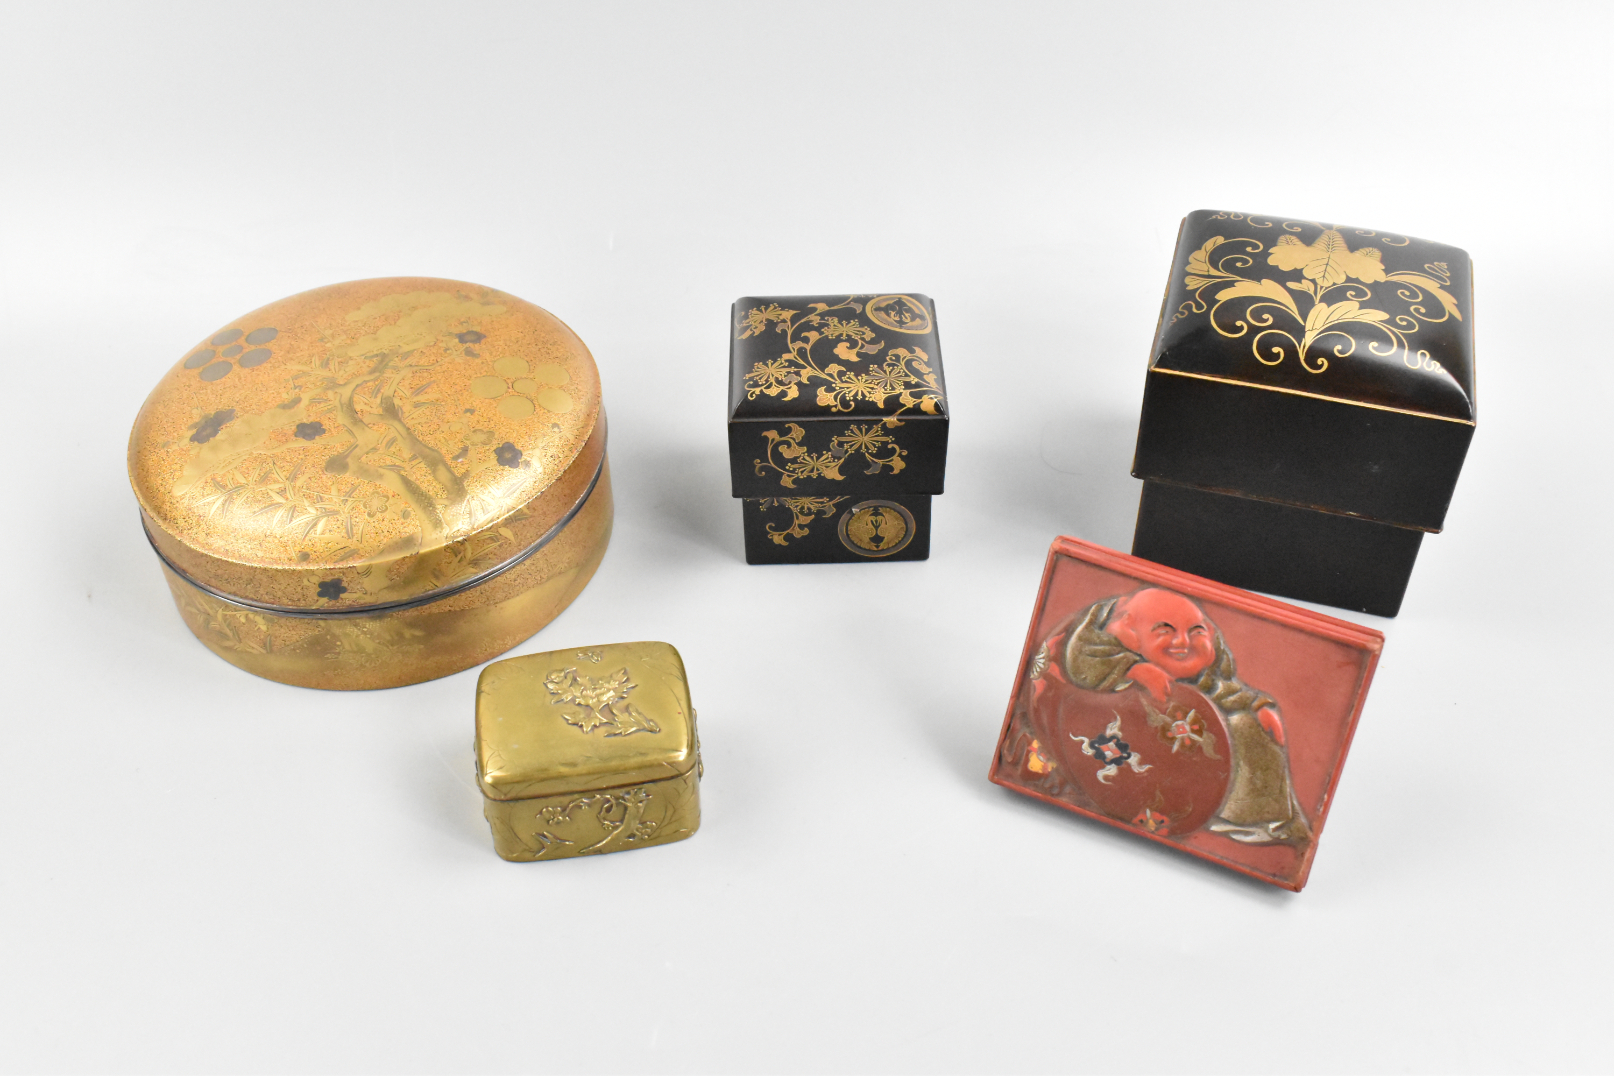 GROUP OF 5 JAPANESE LACQUERED COVERED 301b06